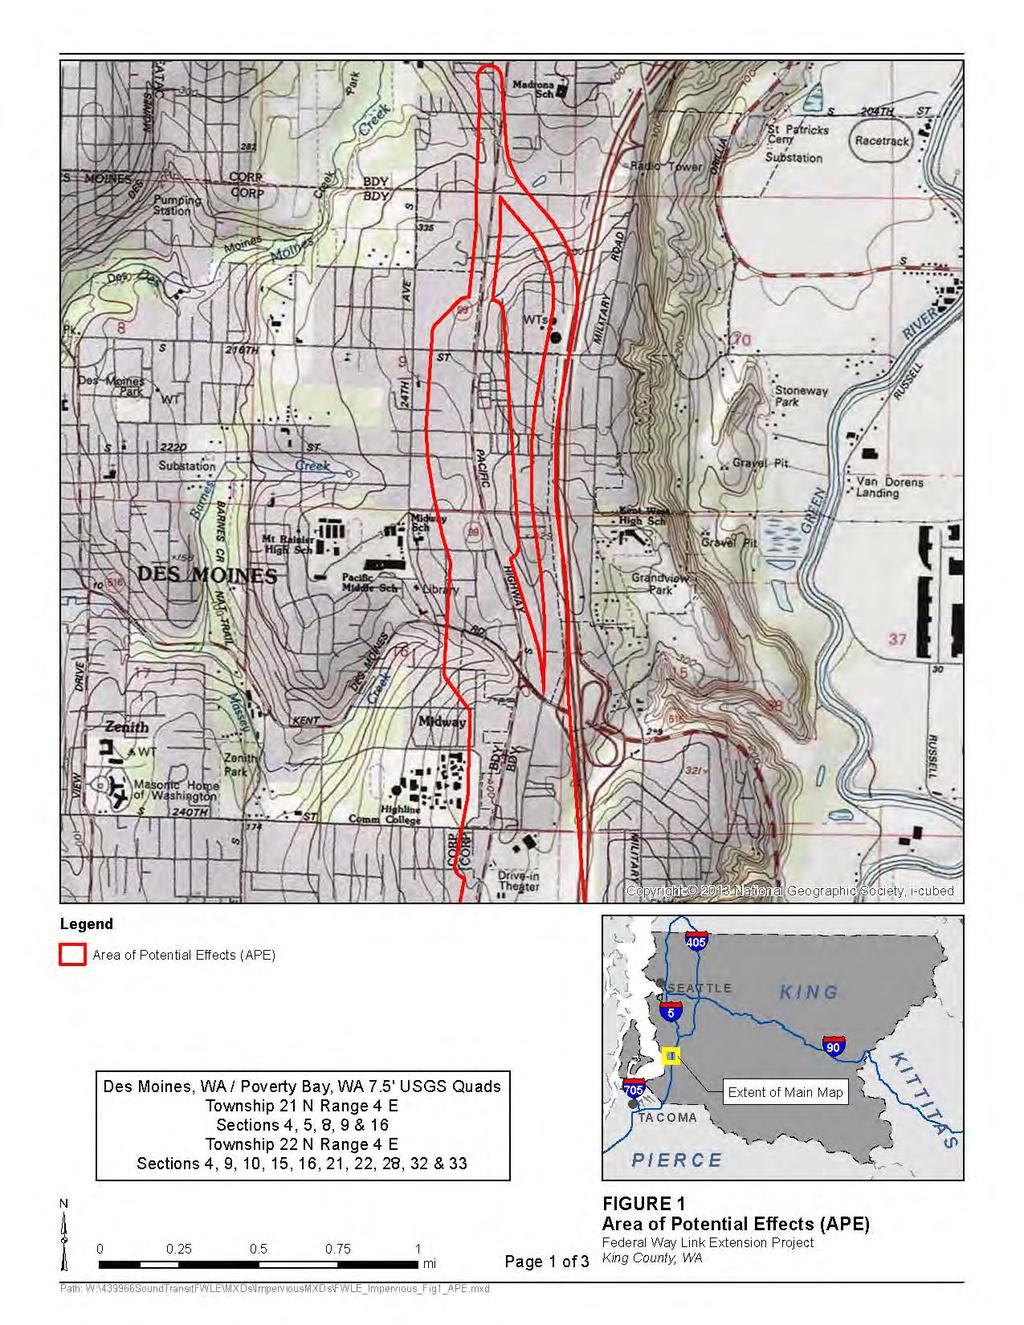 Federal Way Link Extension 6-4 Research Design for Archaeological Fieldwork March